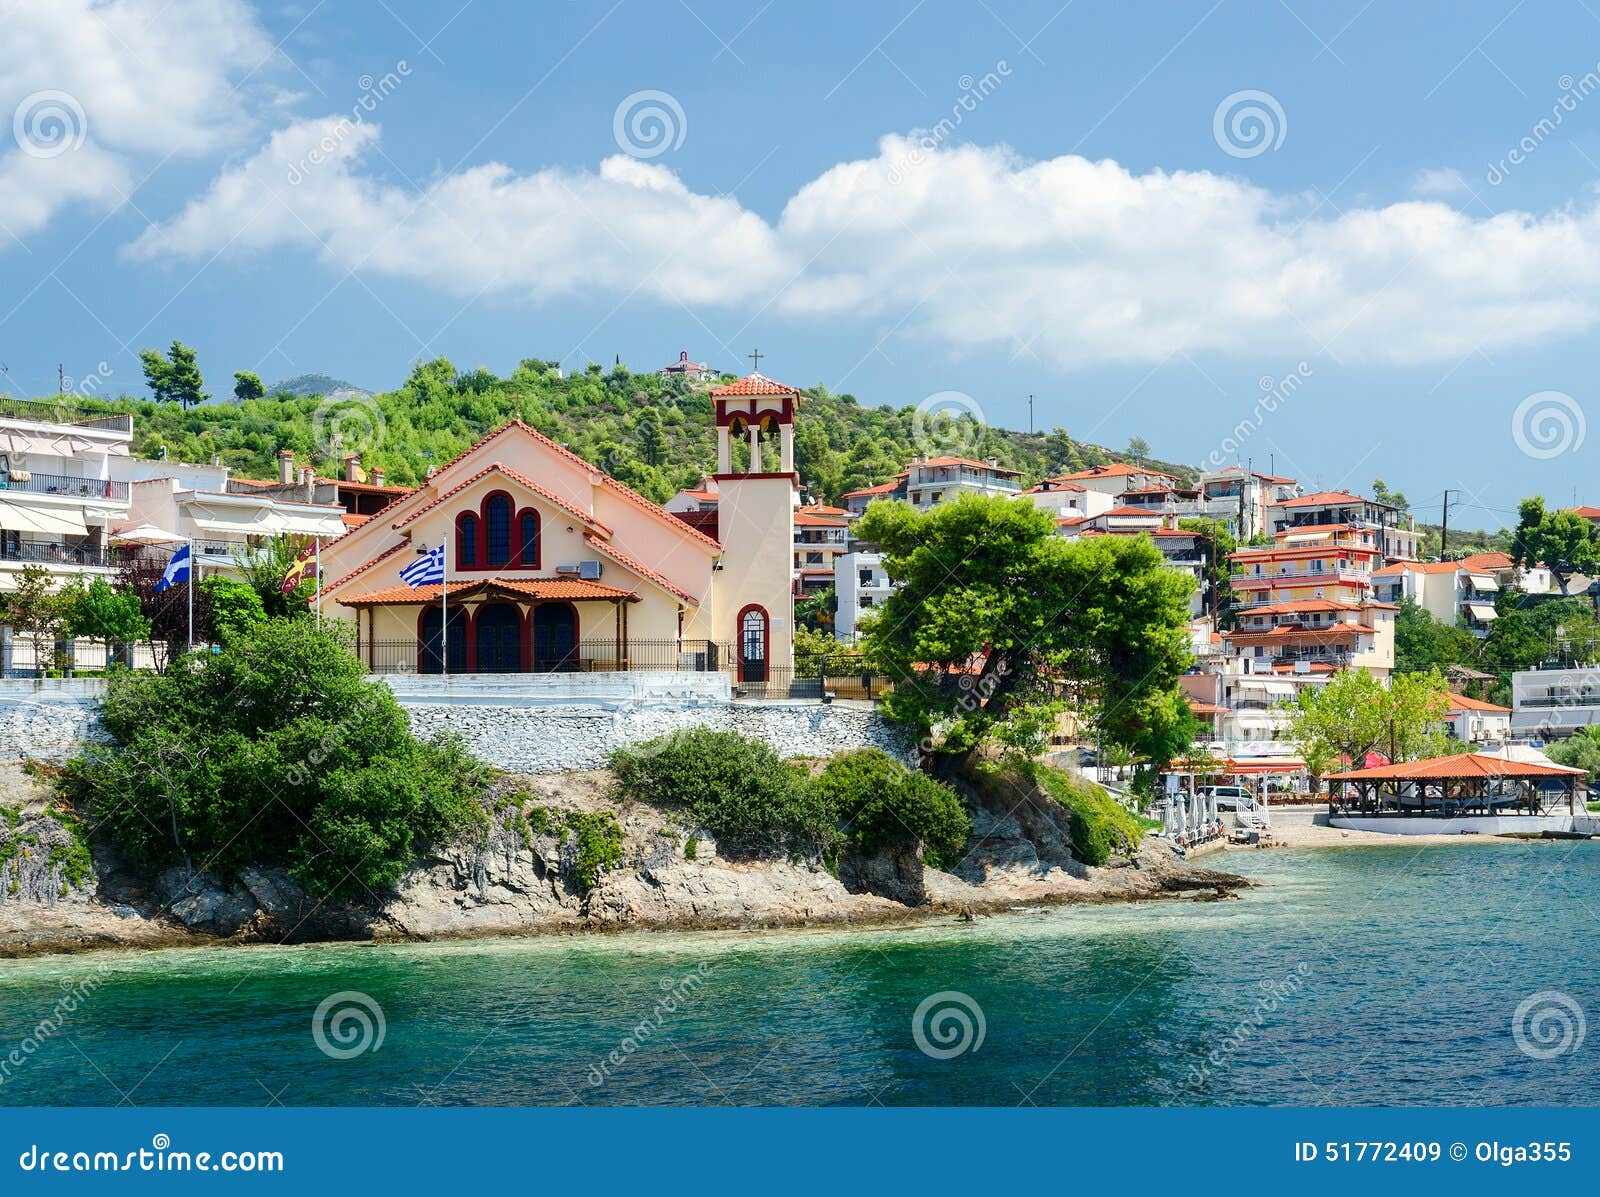 greece, sithonia, view of church on waterfront in neos marmaras